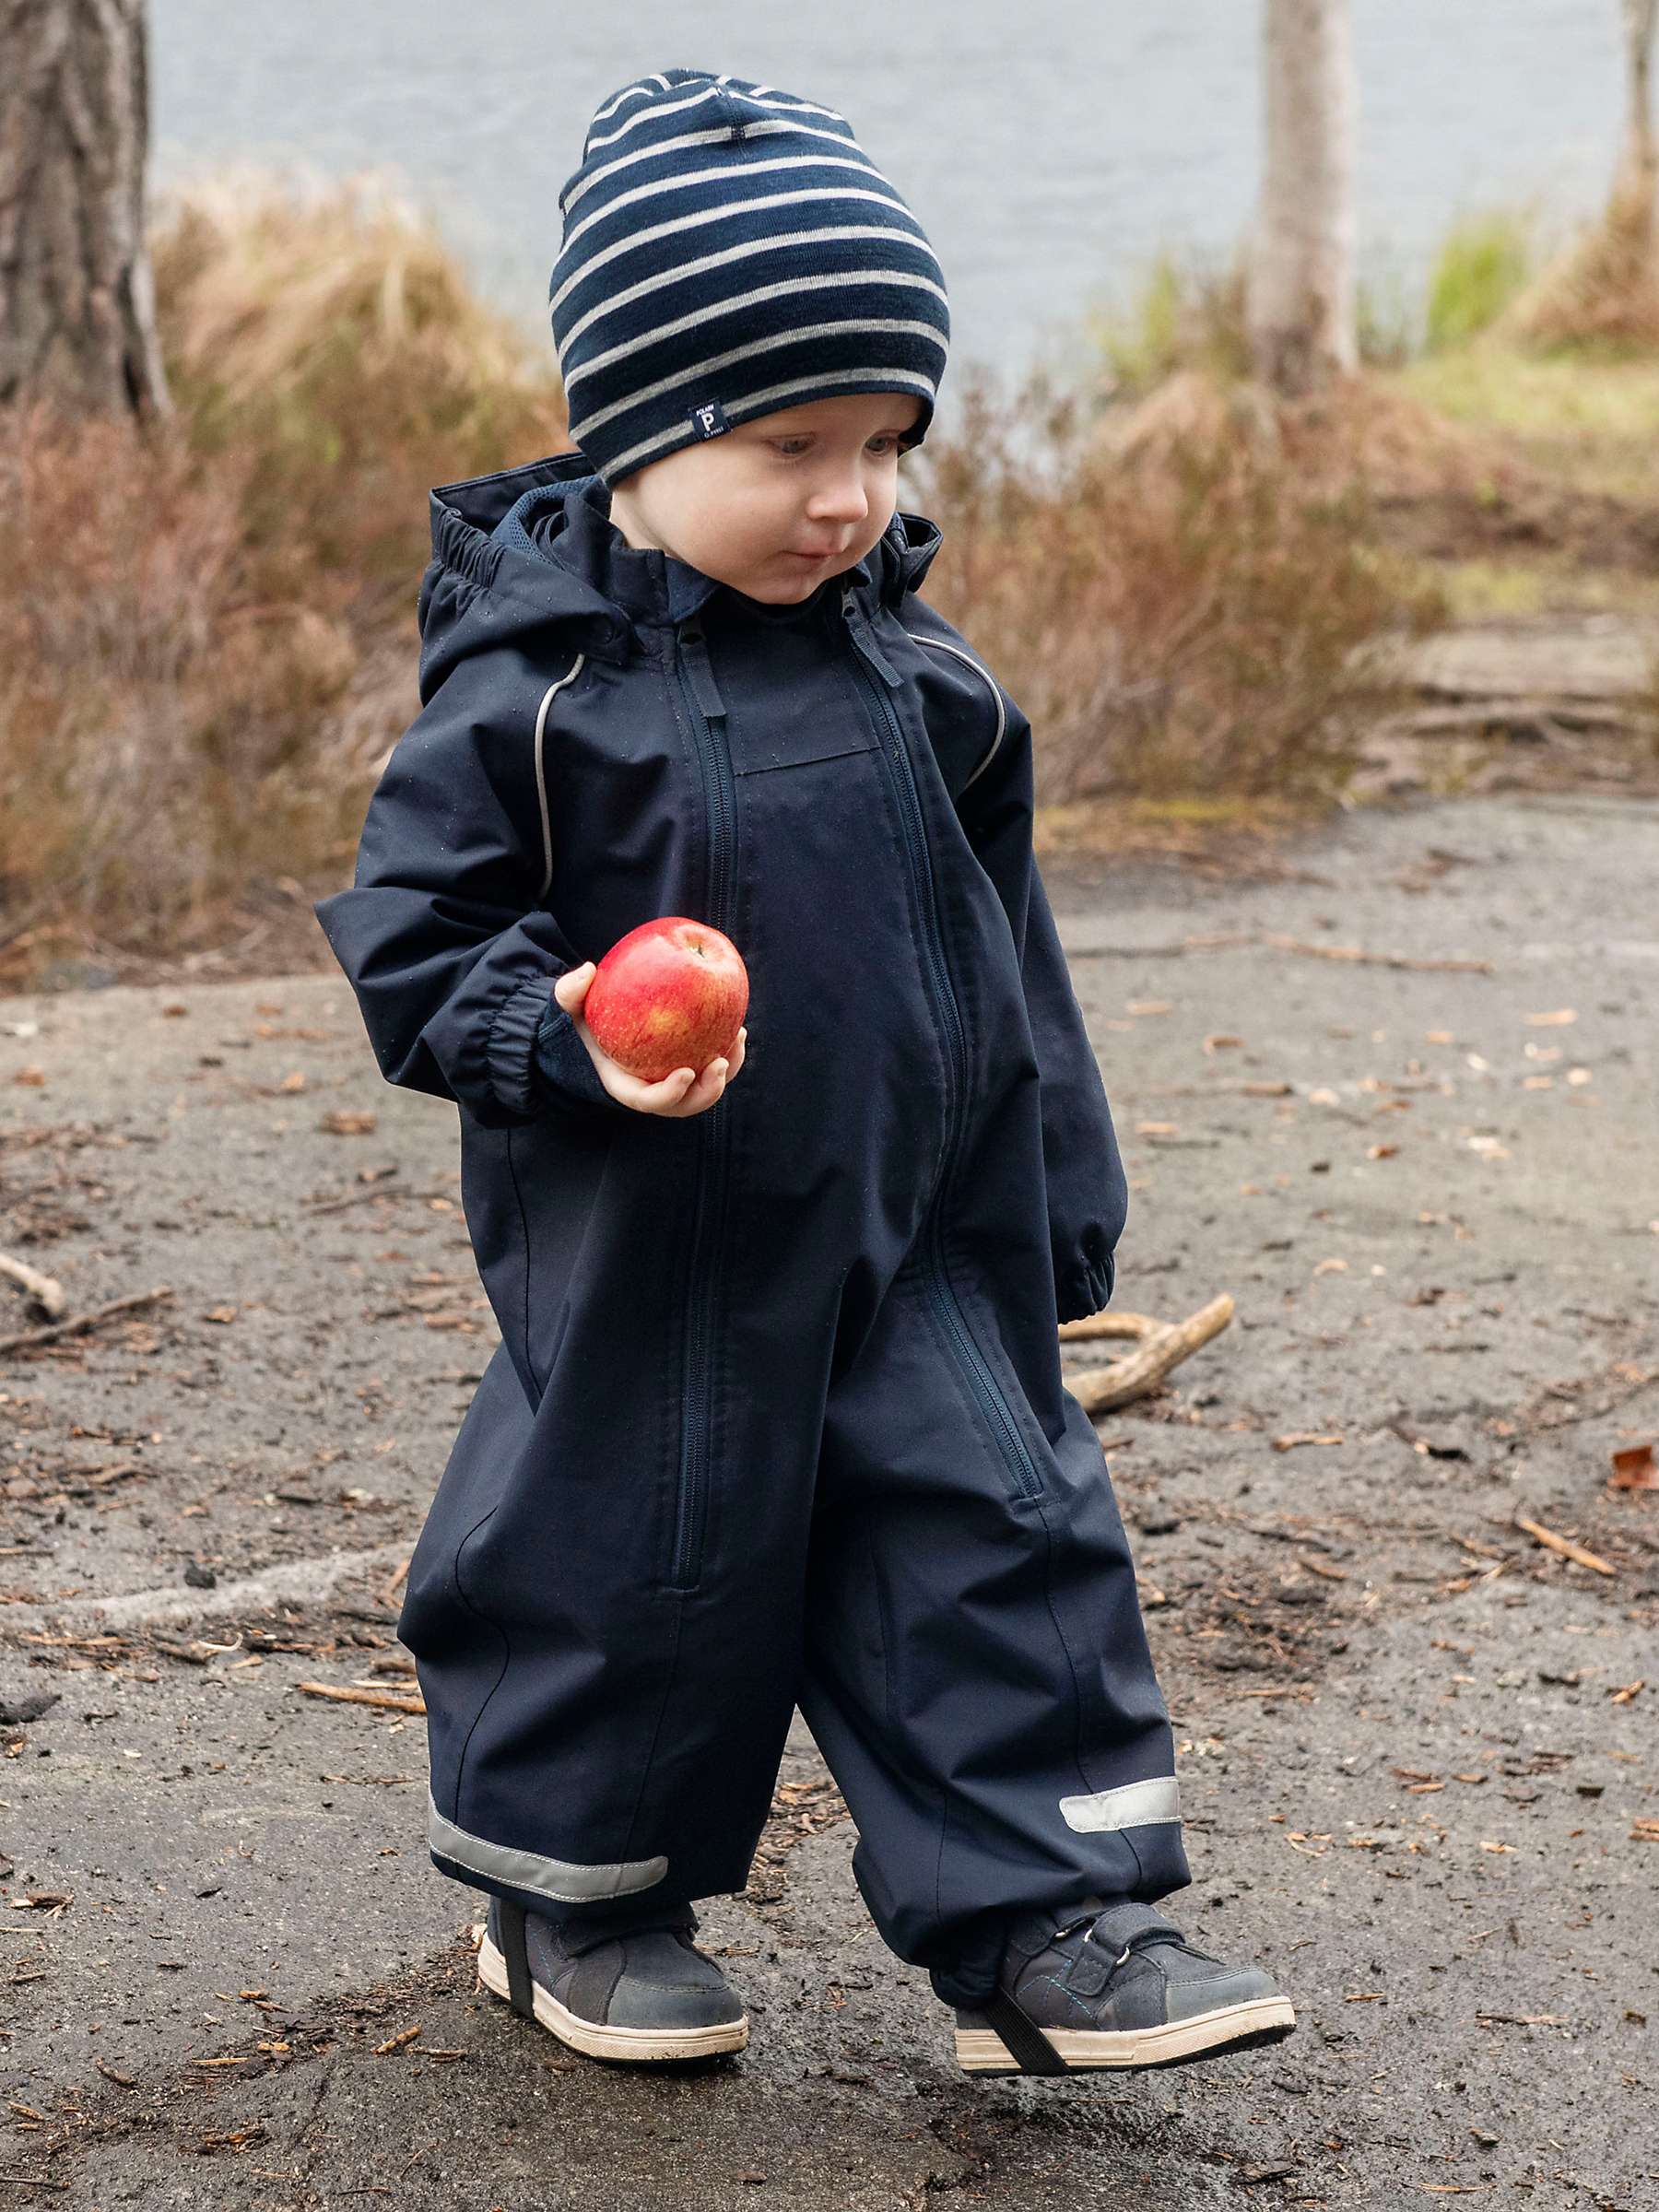 Buy Polarn O. Pyret Baby Waterproof Shell Overall, Dark Sapphire Online at johnlewis.com